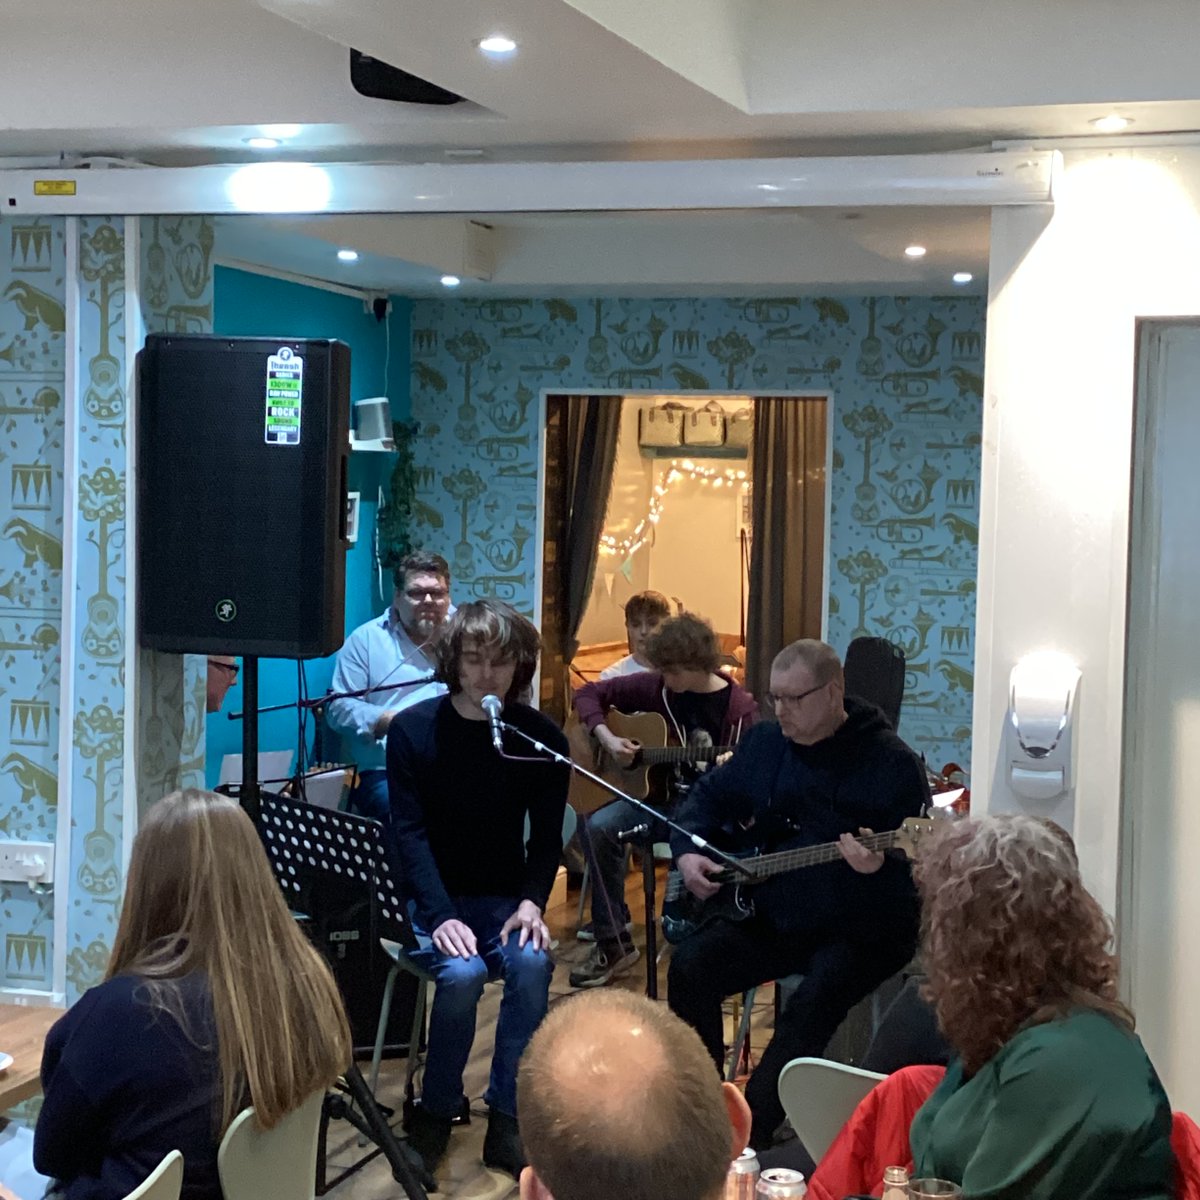 🌊 A huge THANK YOU to the brilliant Dean James Band for an incredible fundraising gig last Friday night! All the money raised will help us continue providing life-changing opportunities for the young adults we work with 💛 #SeaChangeCIC #SaveSeaChangeCIC #SeeTheAbleNotTheLabel